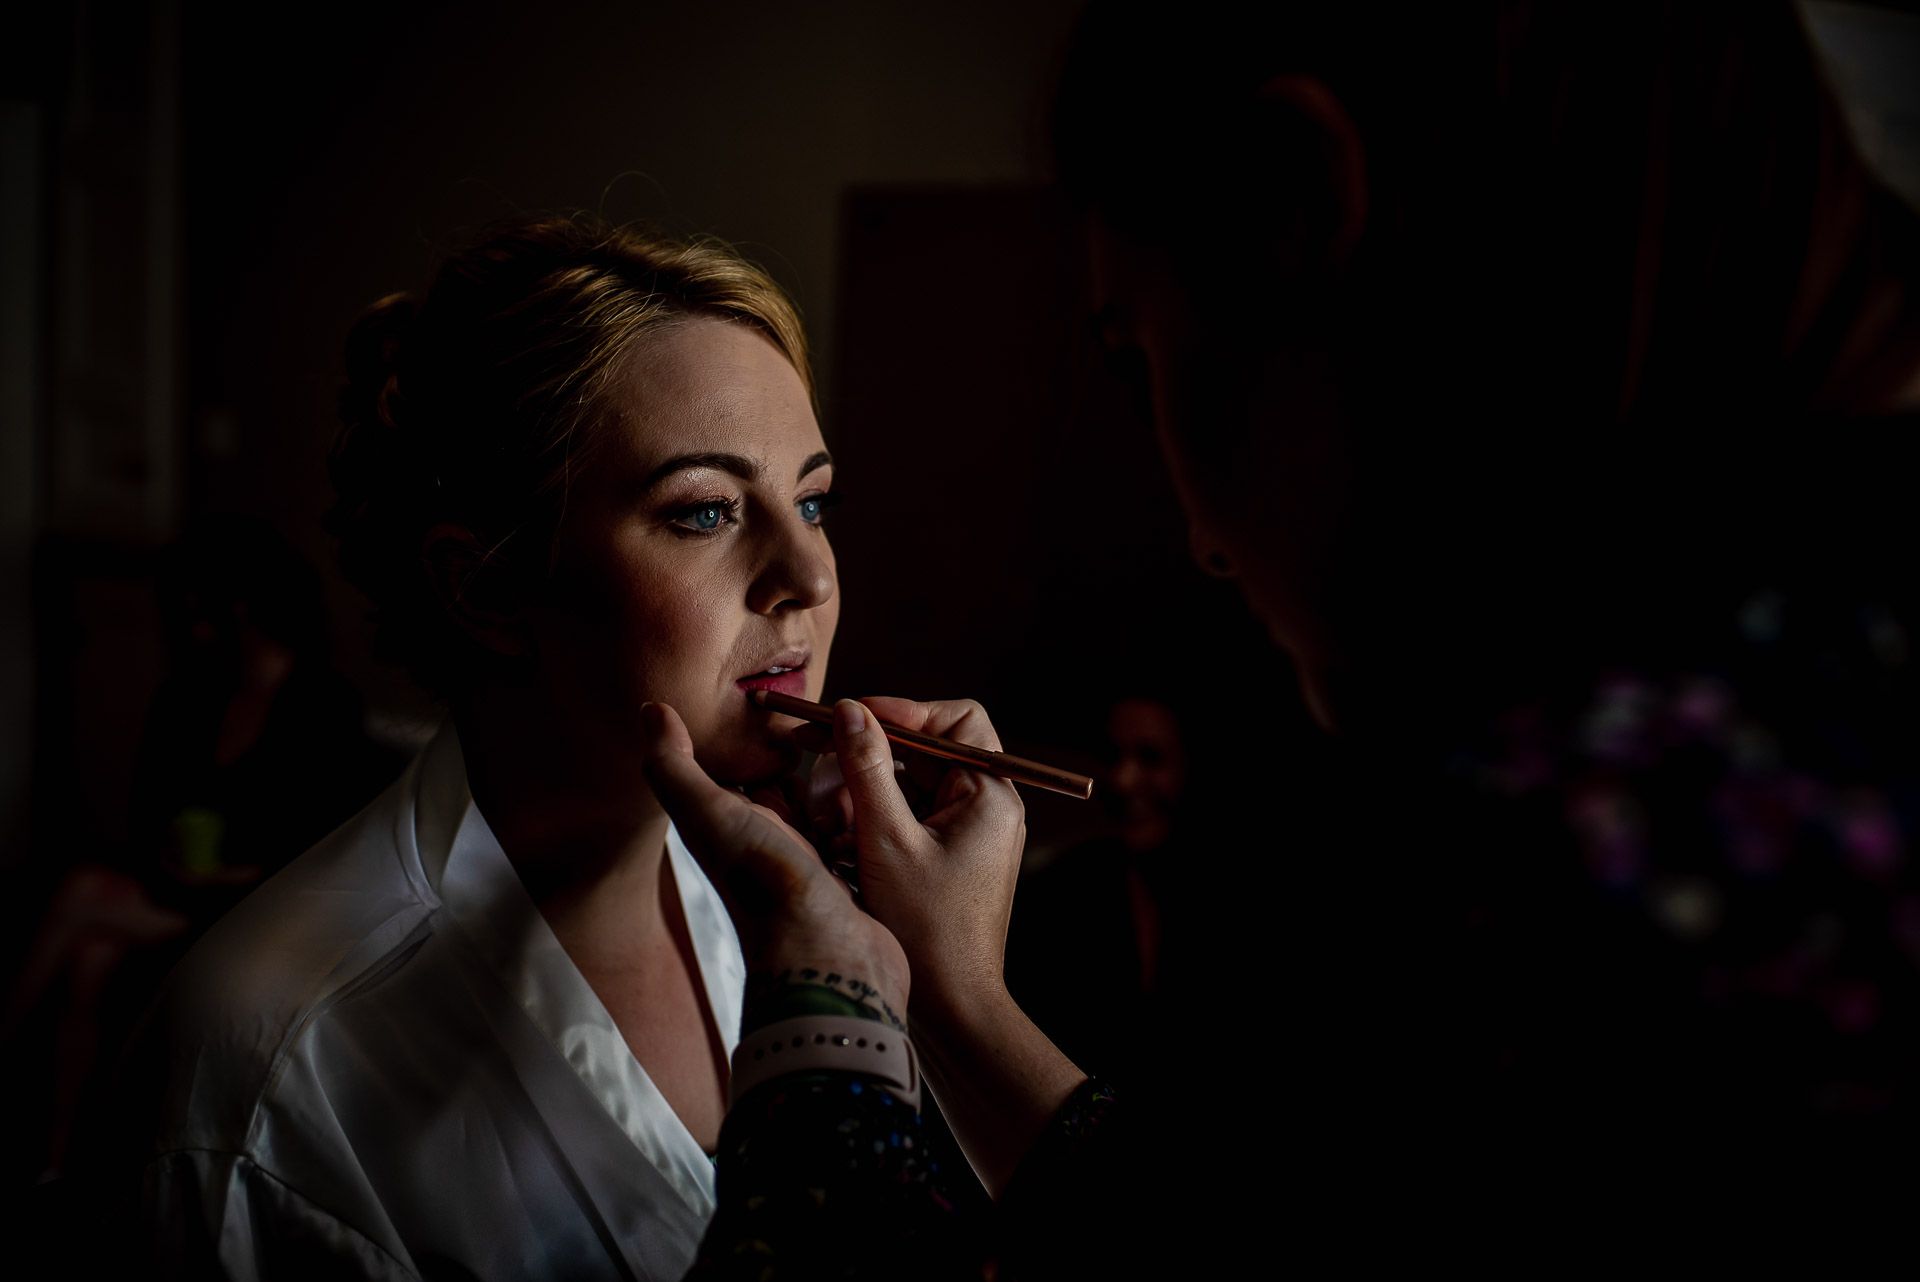 Leah getting ready on the morning of her wedding at Emmanuel College in Cambridge - Photo taken by Damien Vickers Photography